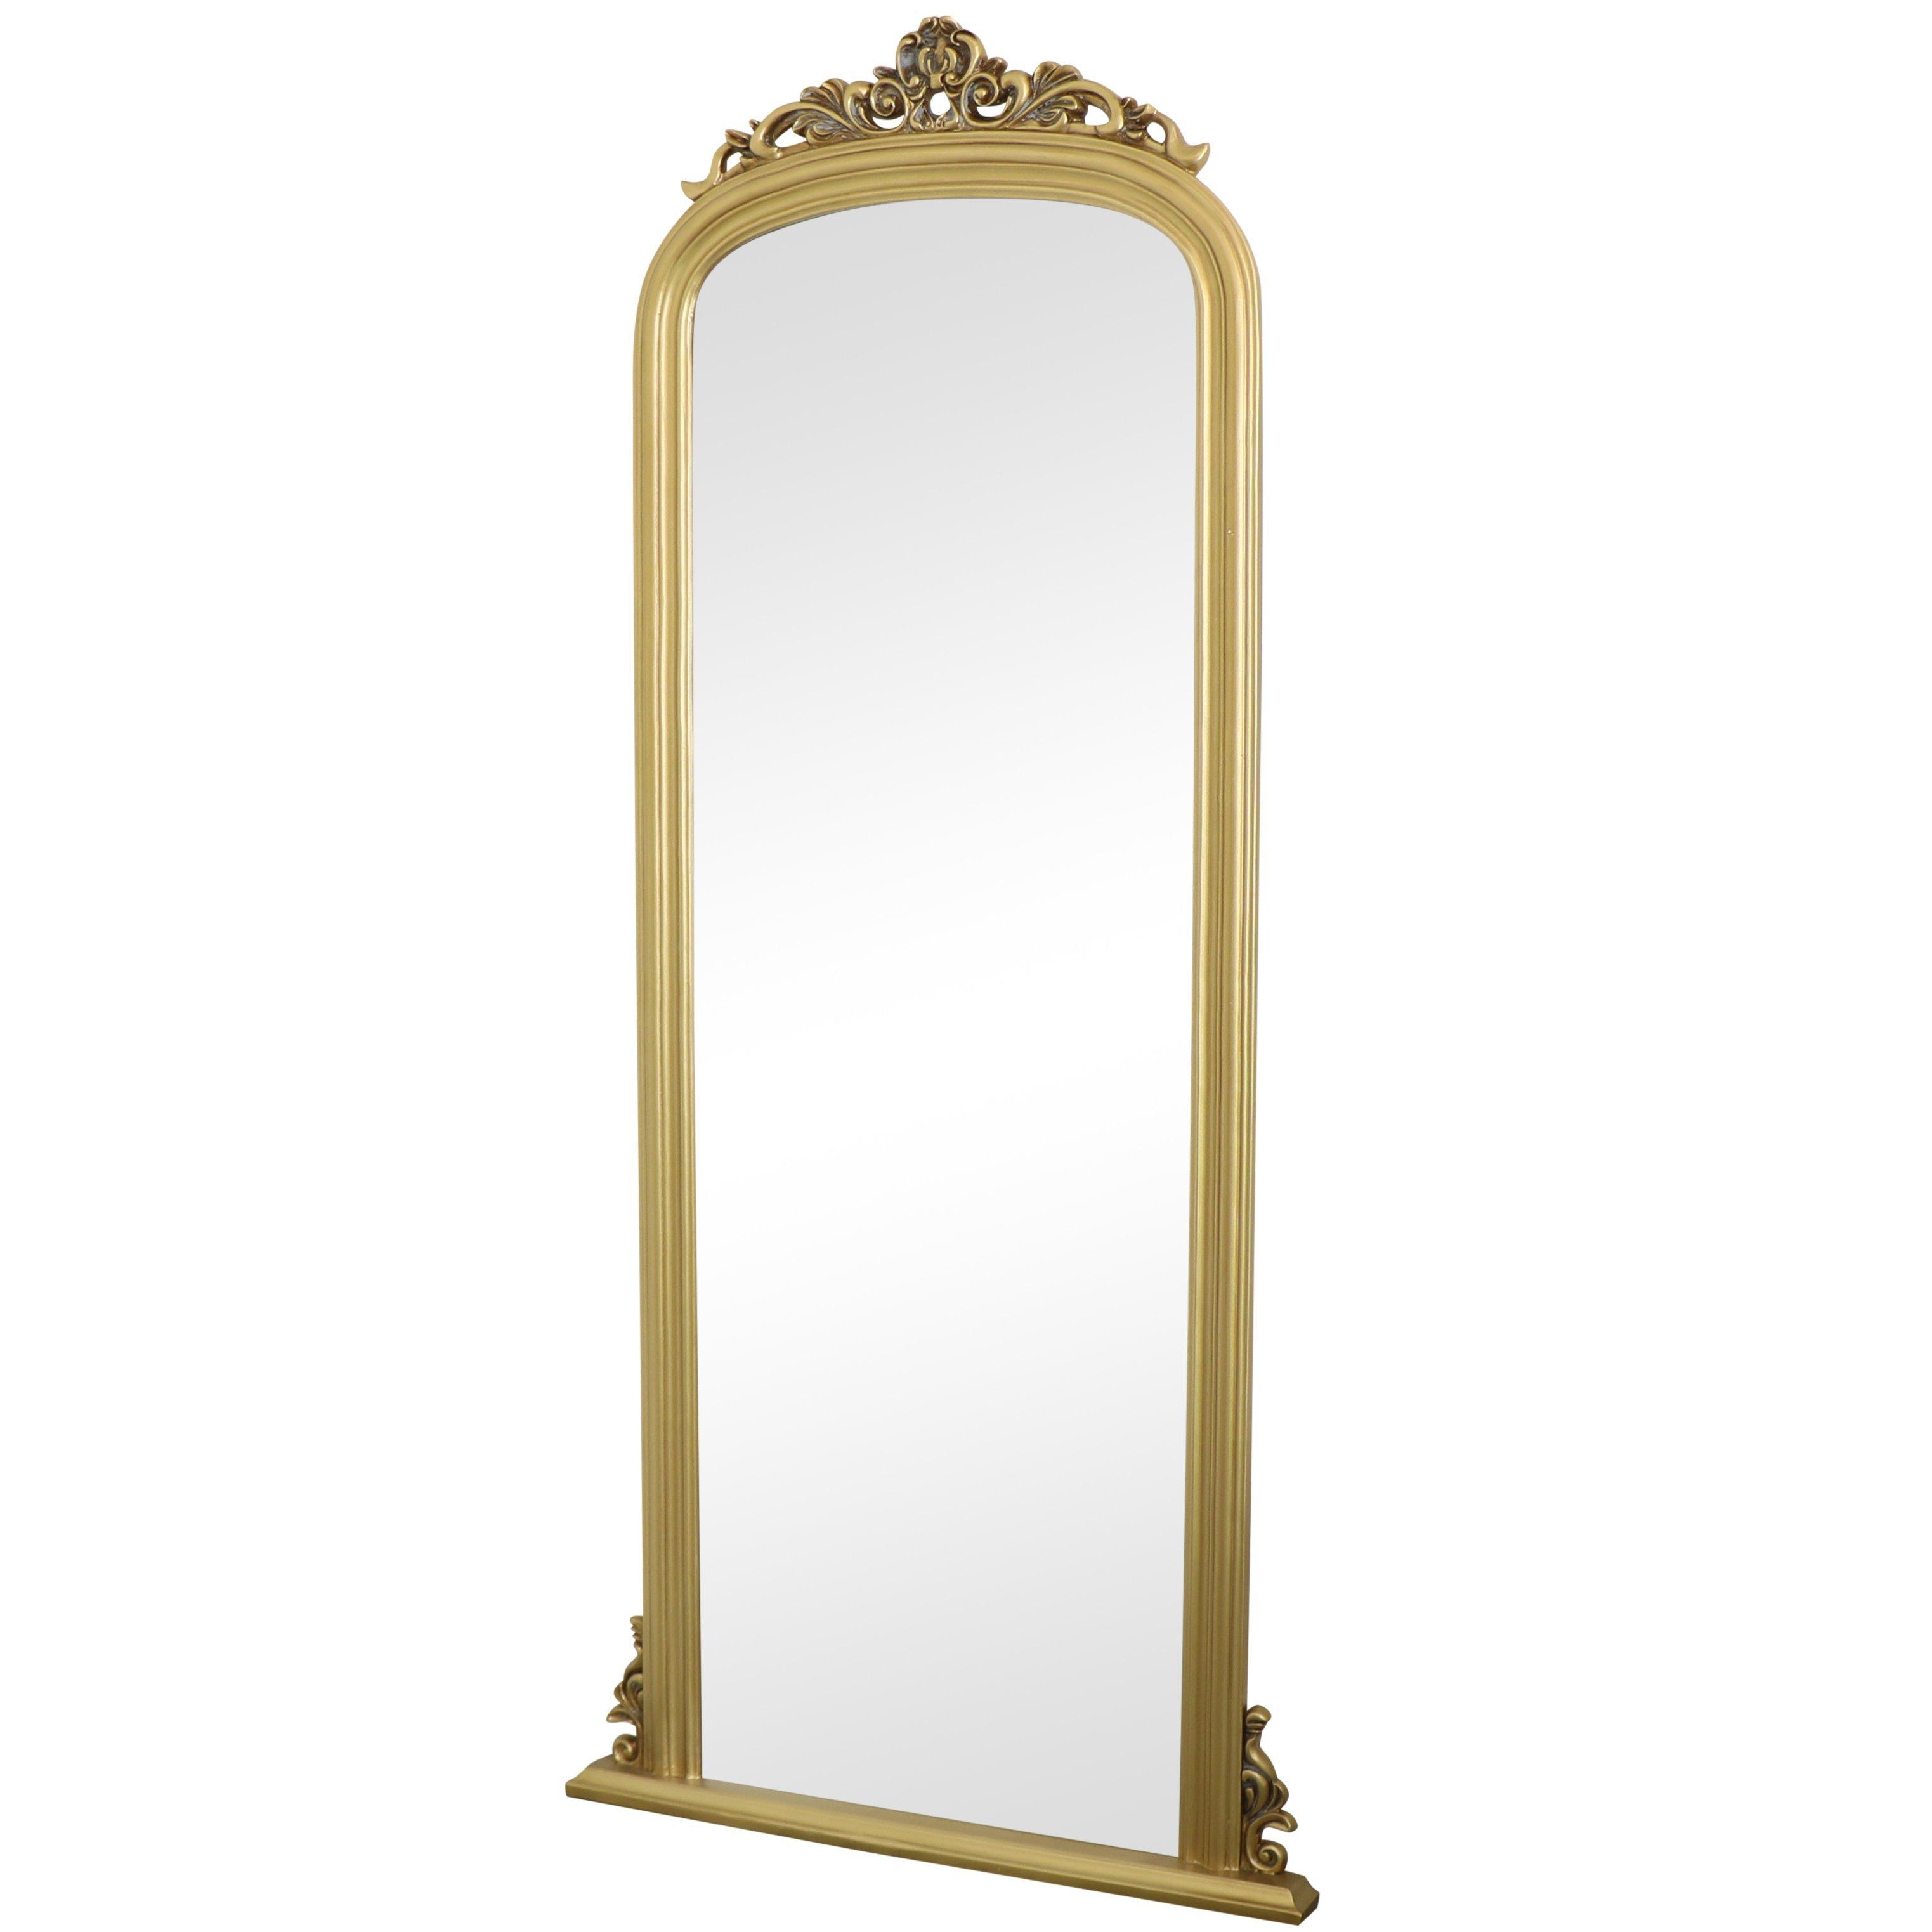 Tall Gold Ornate Vintage Wall / Leaner Mirror 80cm X 180cm